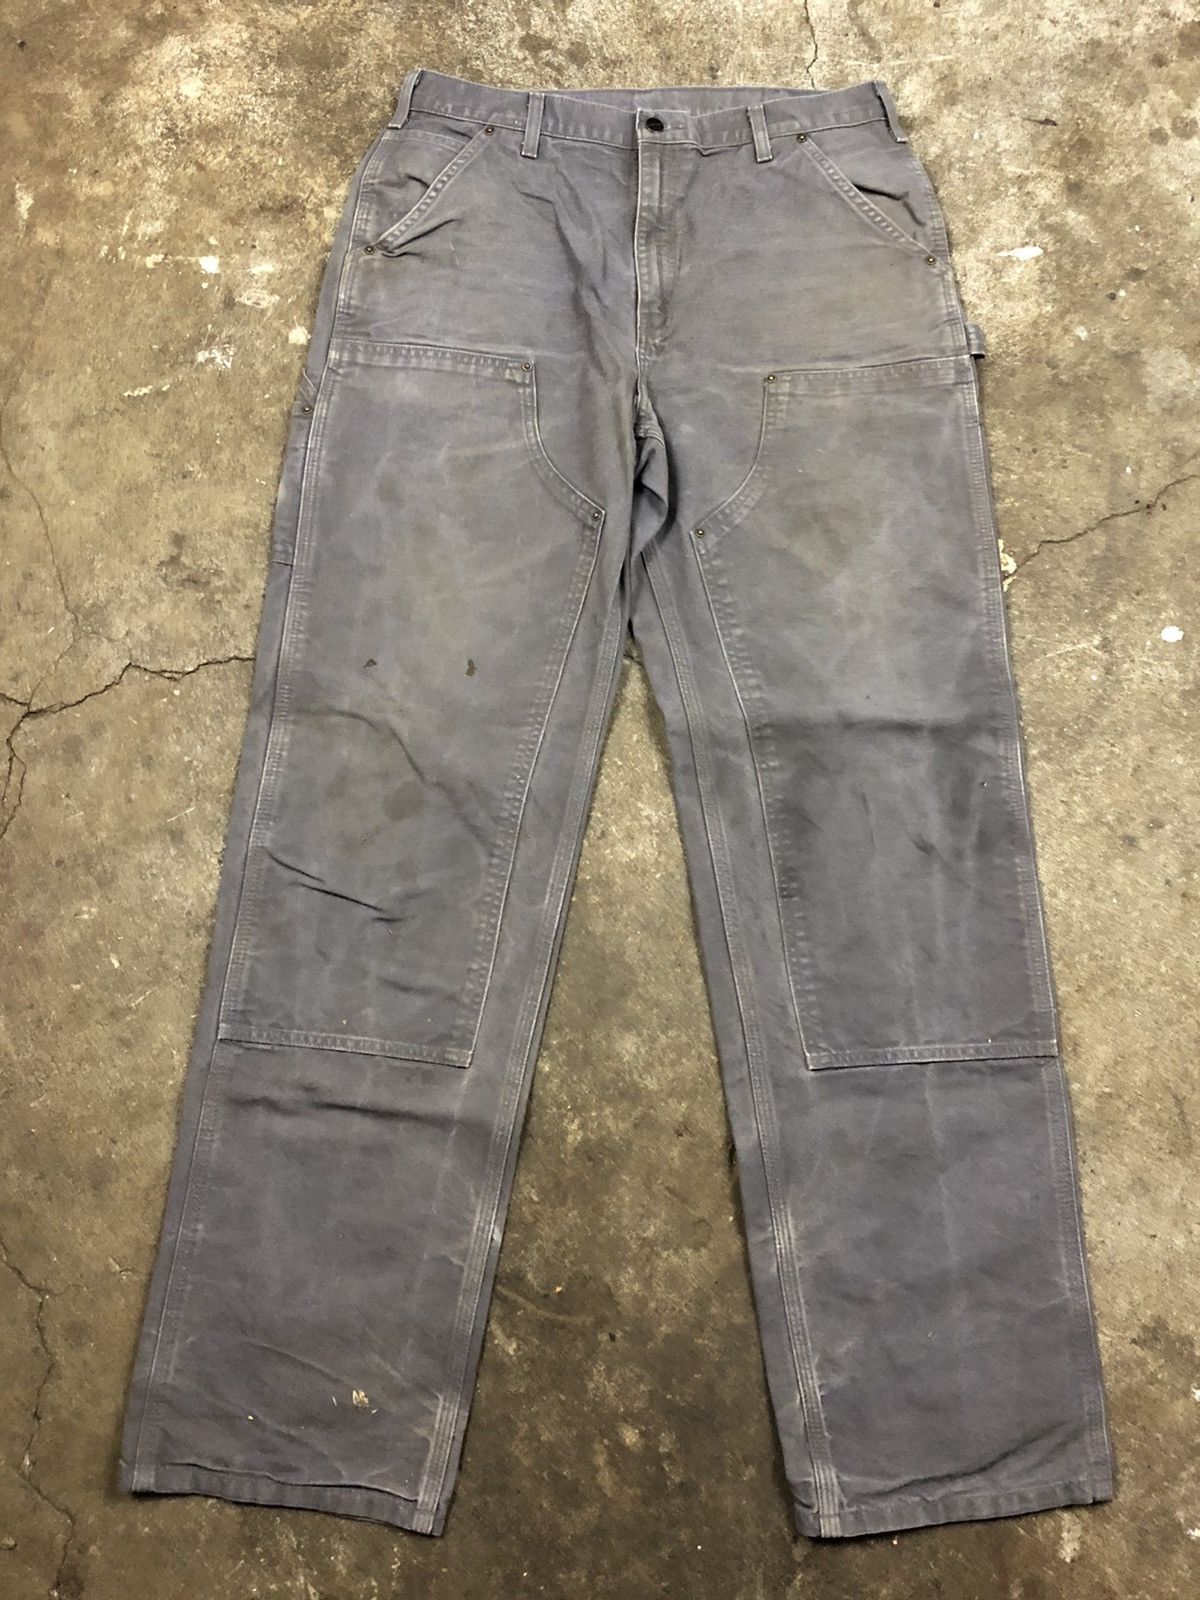 Vintage Carhartt Double Knee Work Pants 34x36 Faded Distressed Size US 34 / EU 50 - 1 Preview